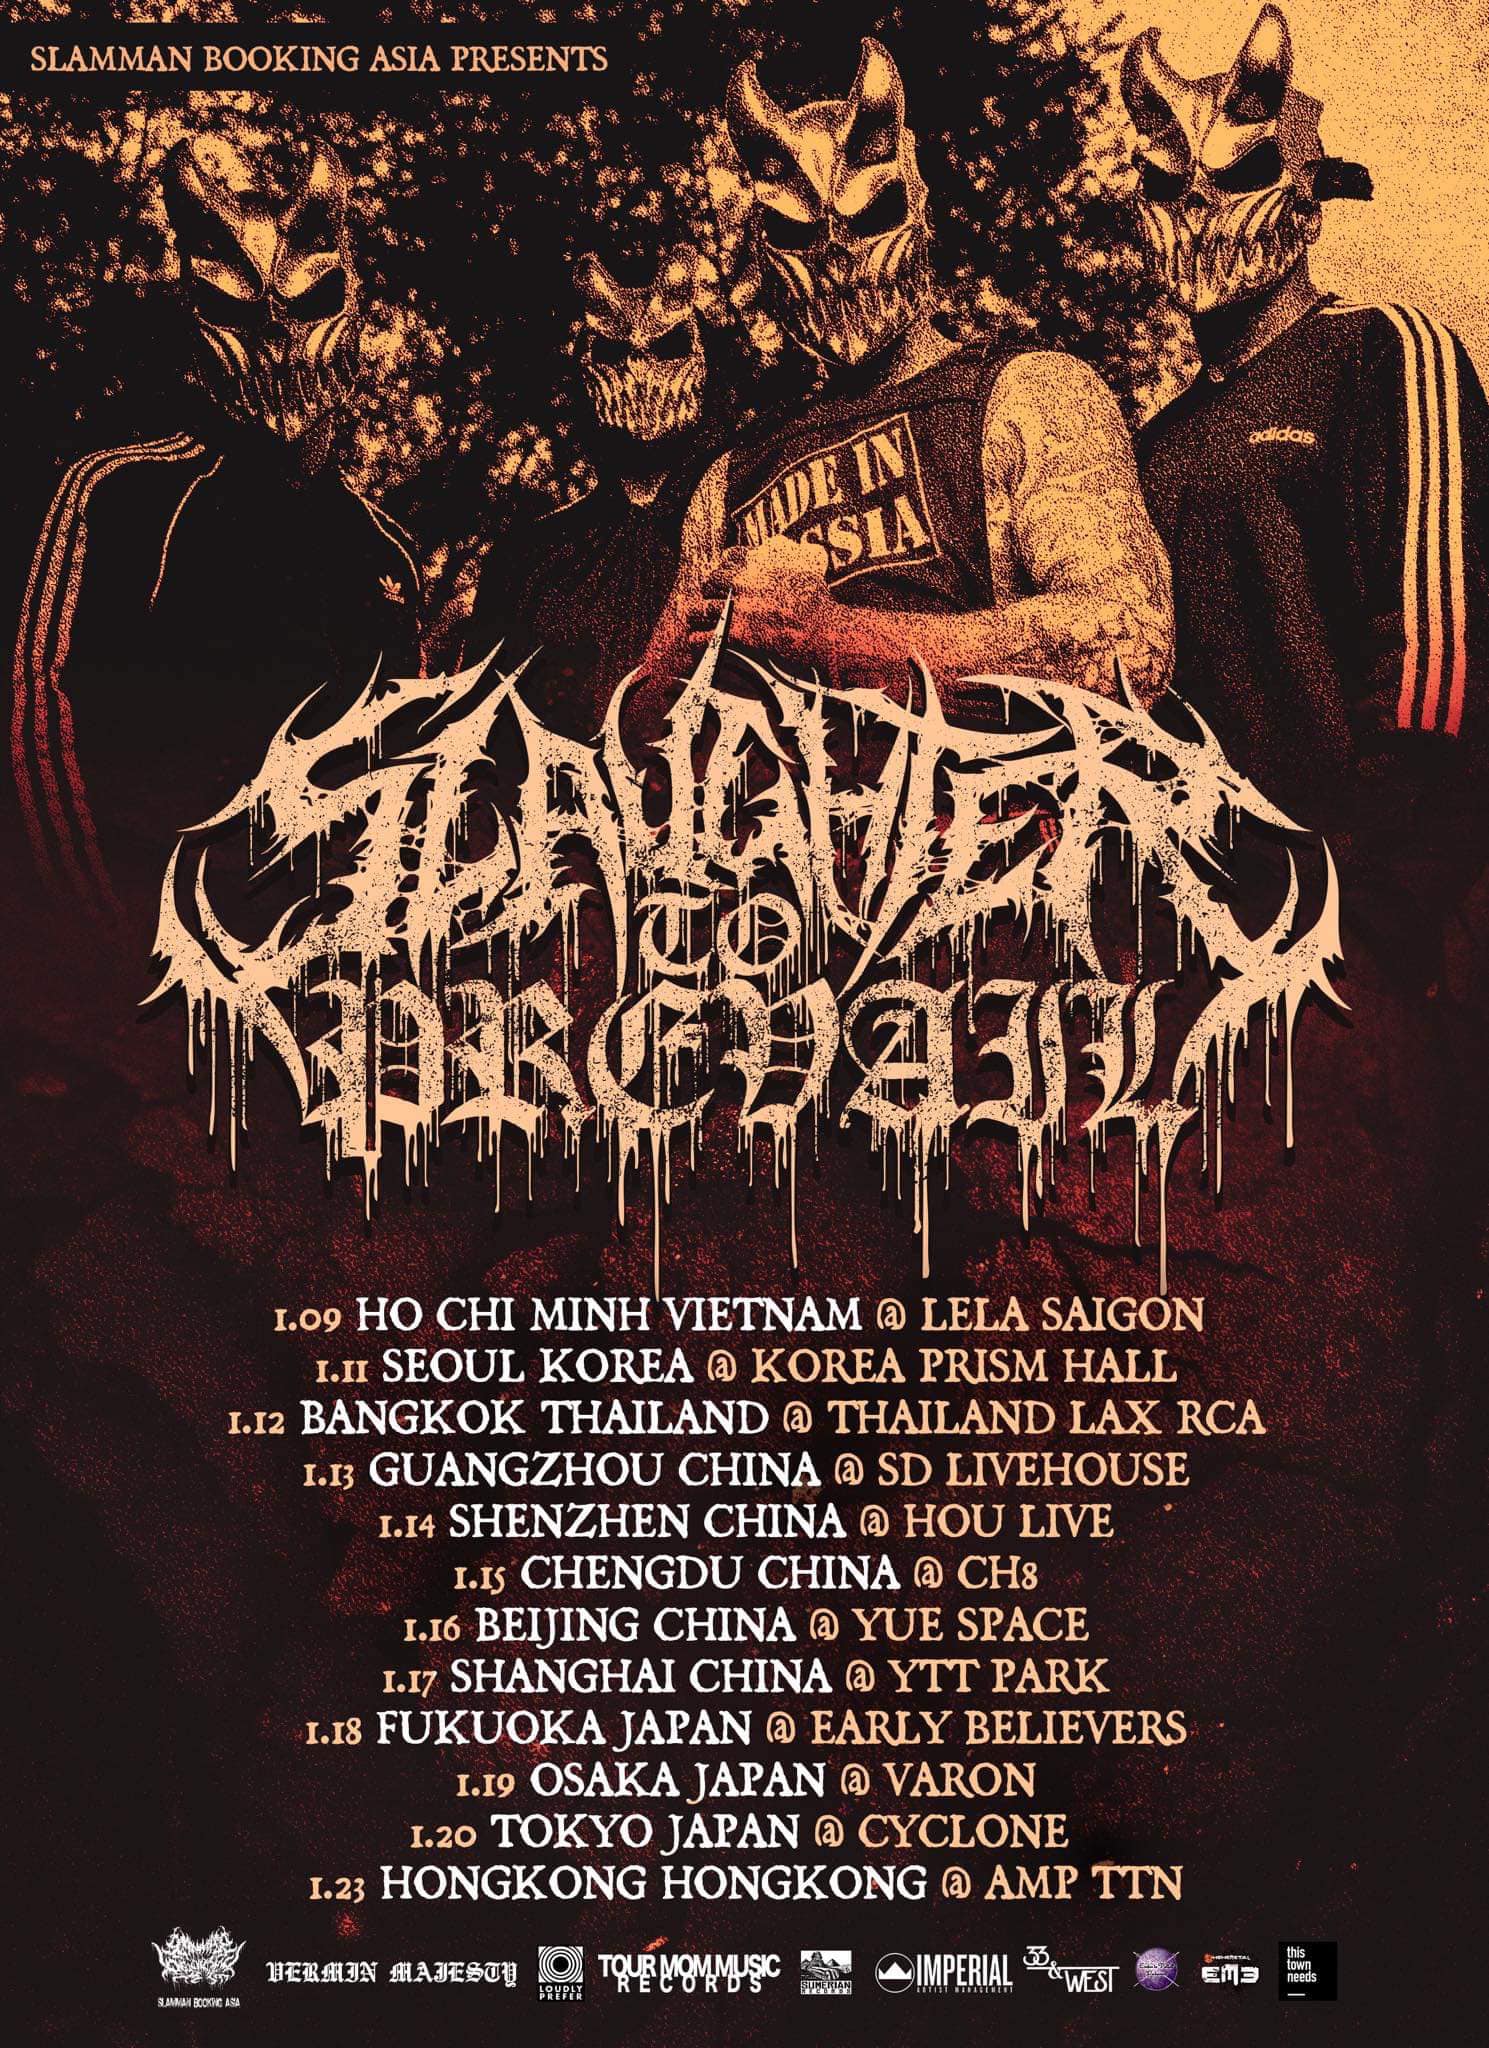 Slamman Booking Agency Make Even More Updates To Slaughter To Prevail